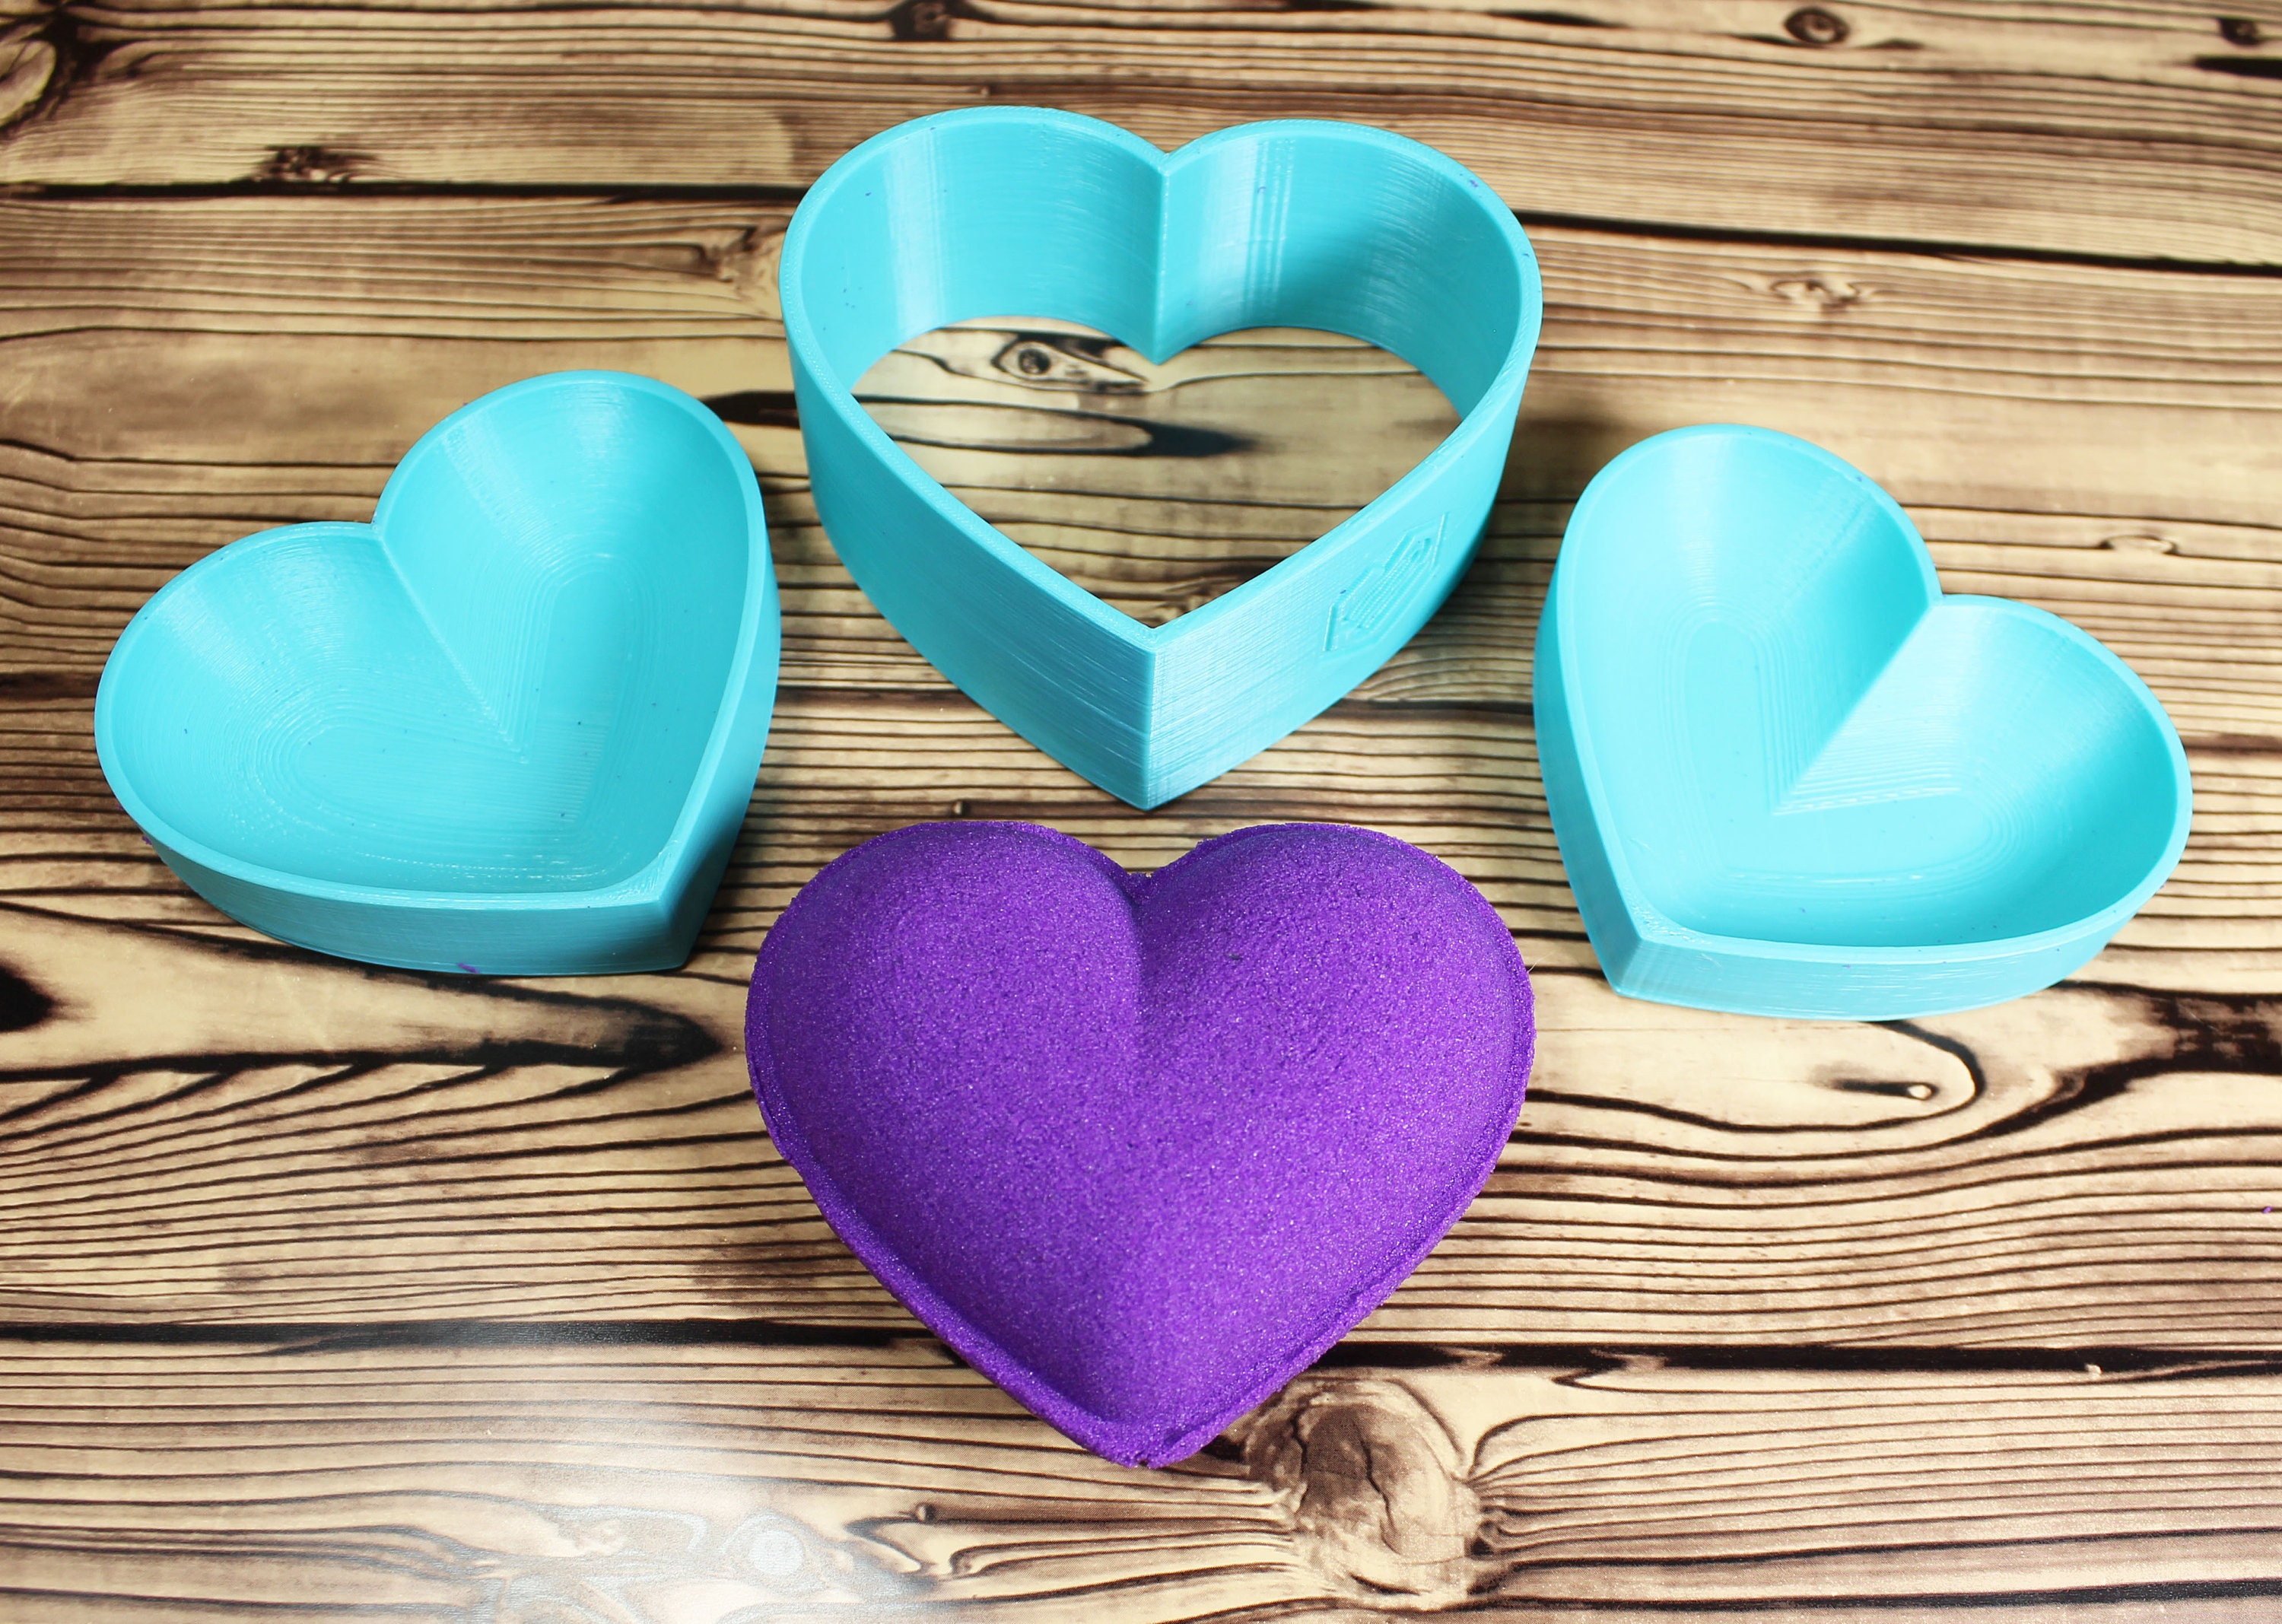 3D Heart Fondant Silicone Mold-Heart Shaped Resin Mold-Heart Jewelry –  FunYouFunMe